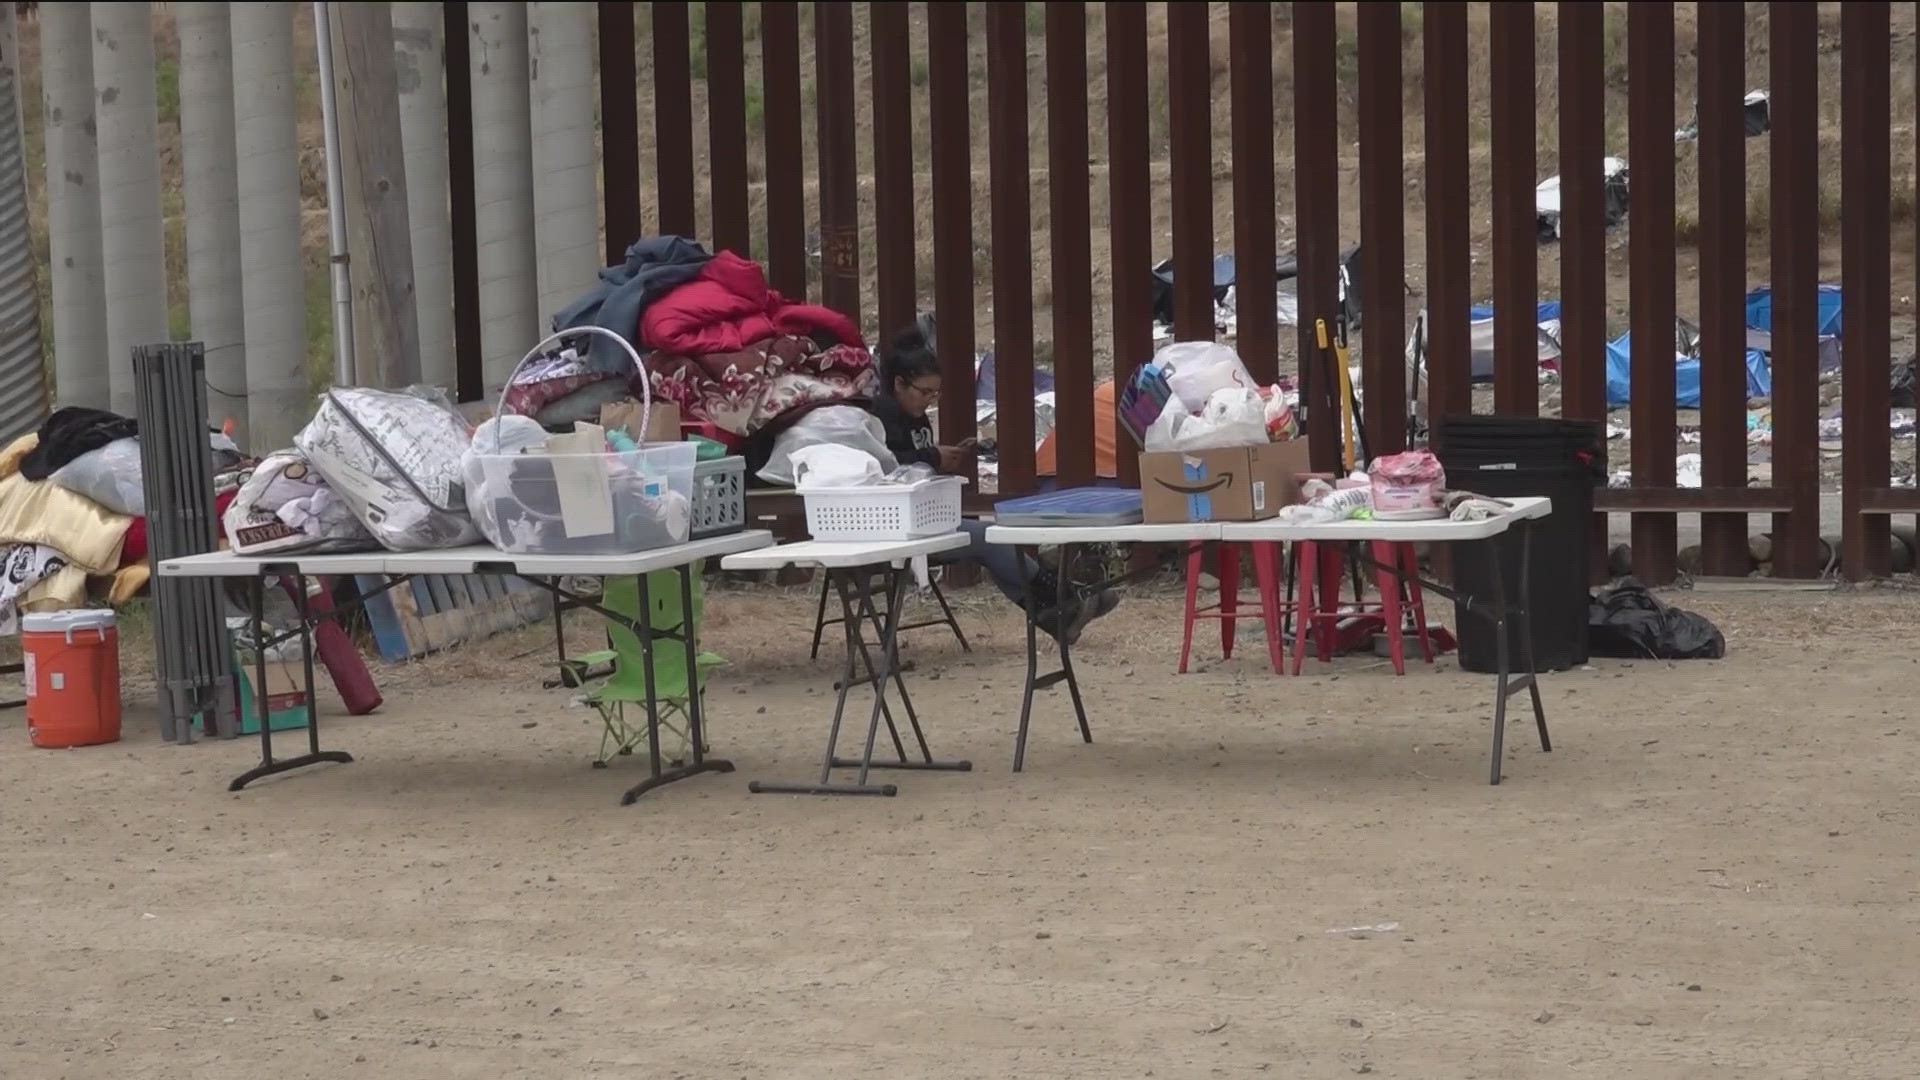 Border volunteers say many donated items will be moved from the border to help migrants in Jacumba and other nearby shelters.